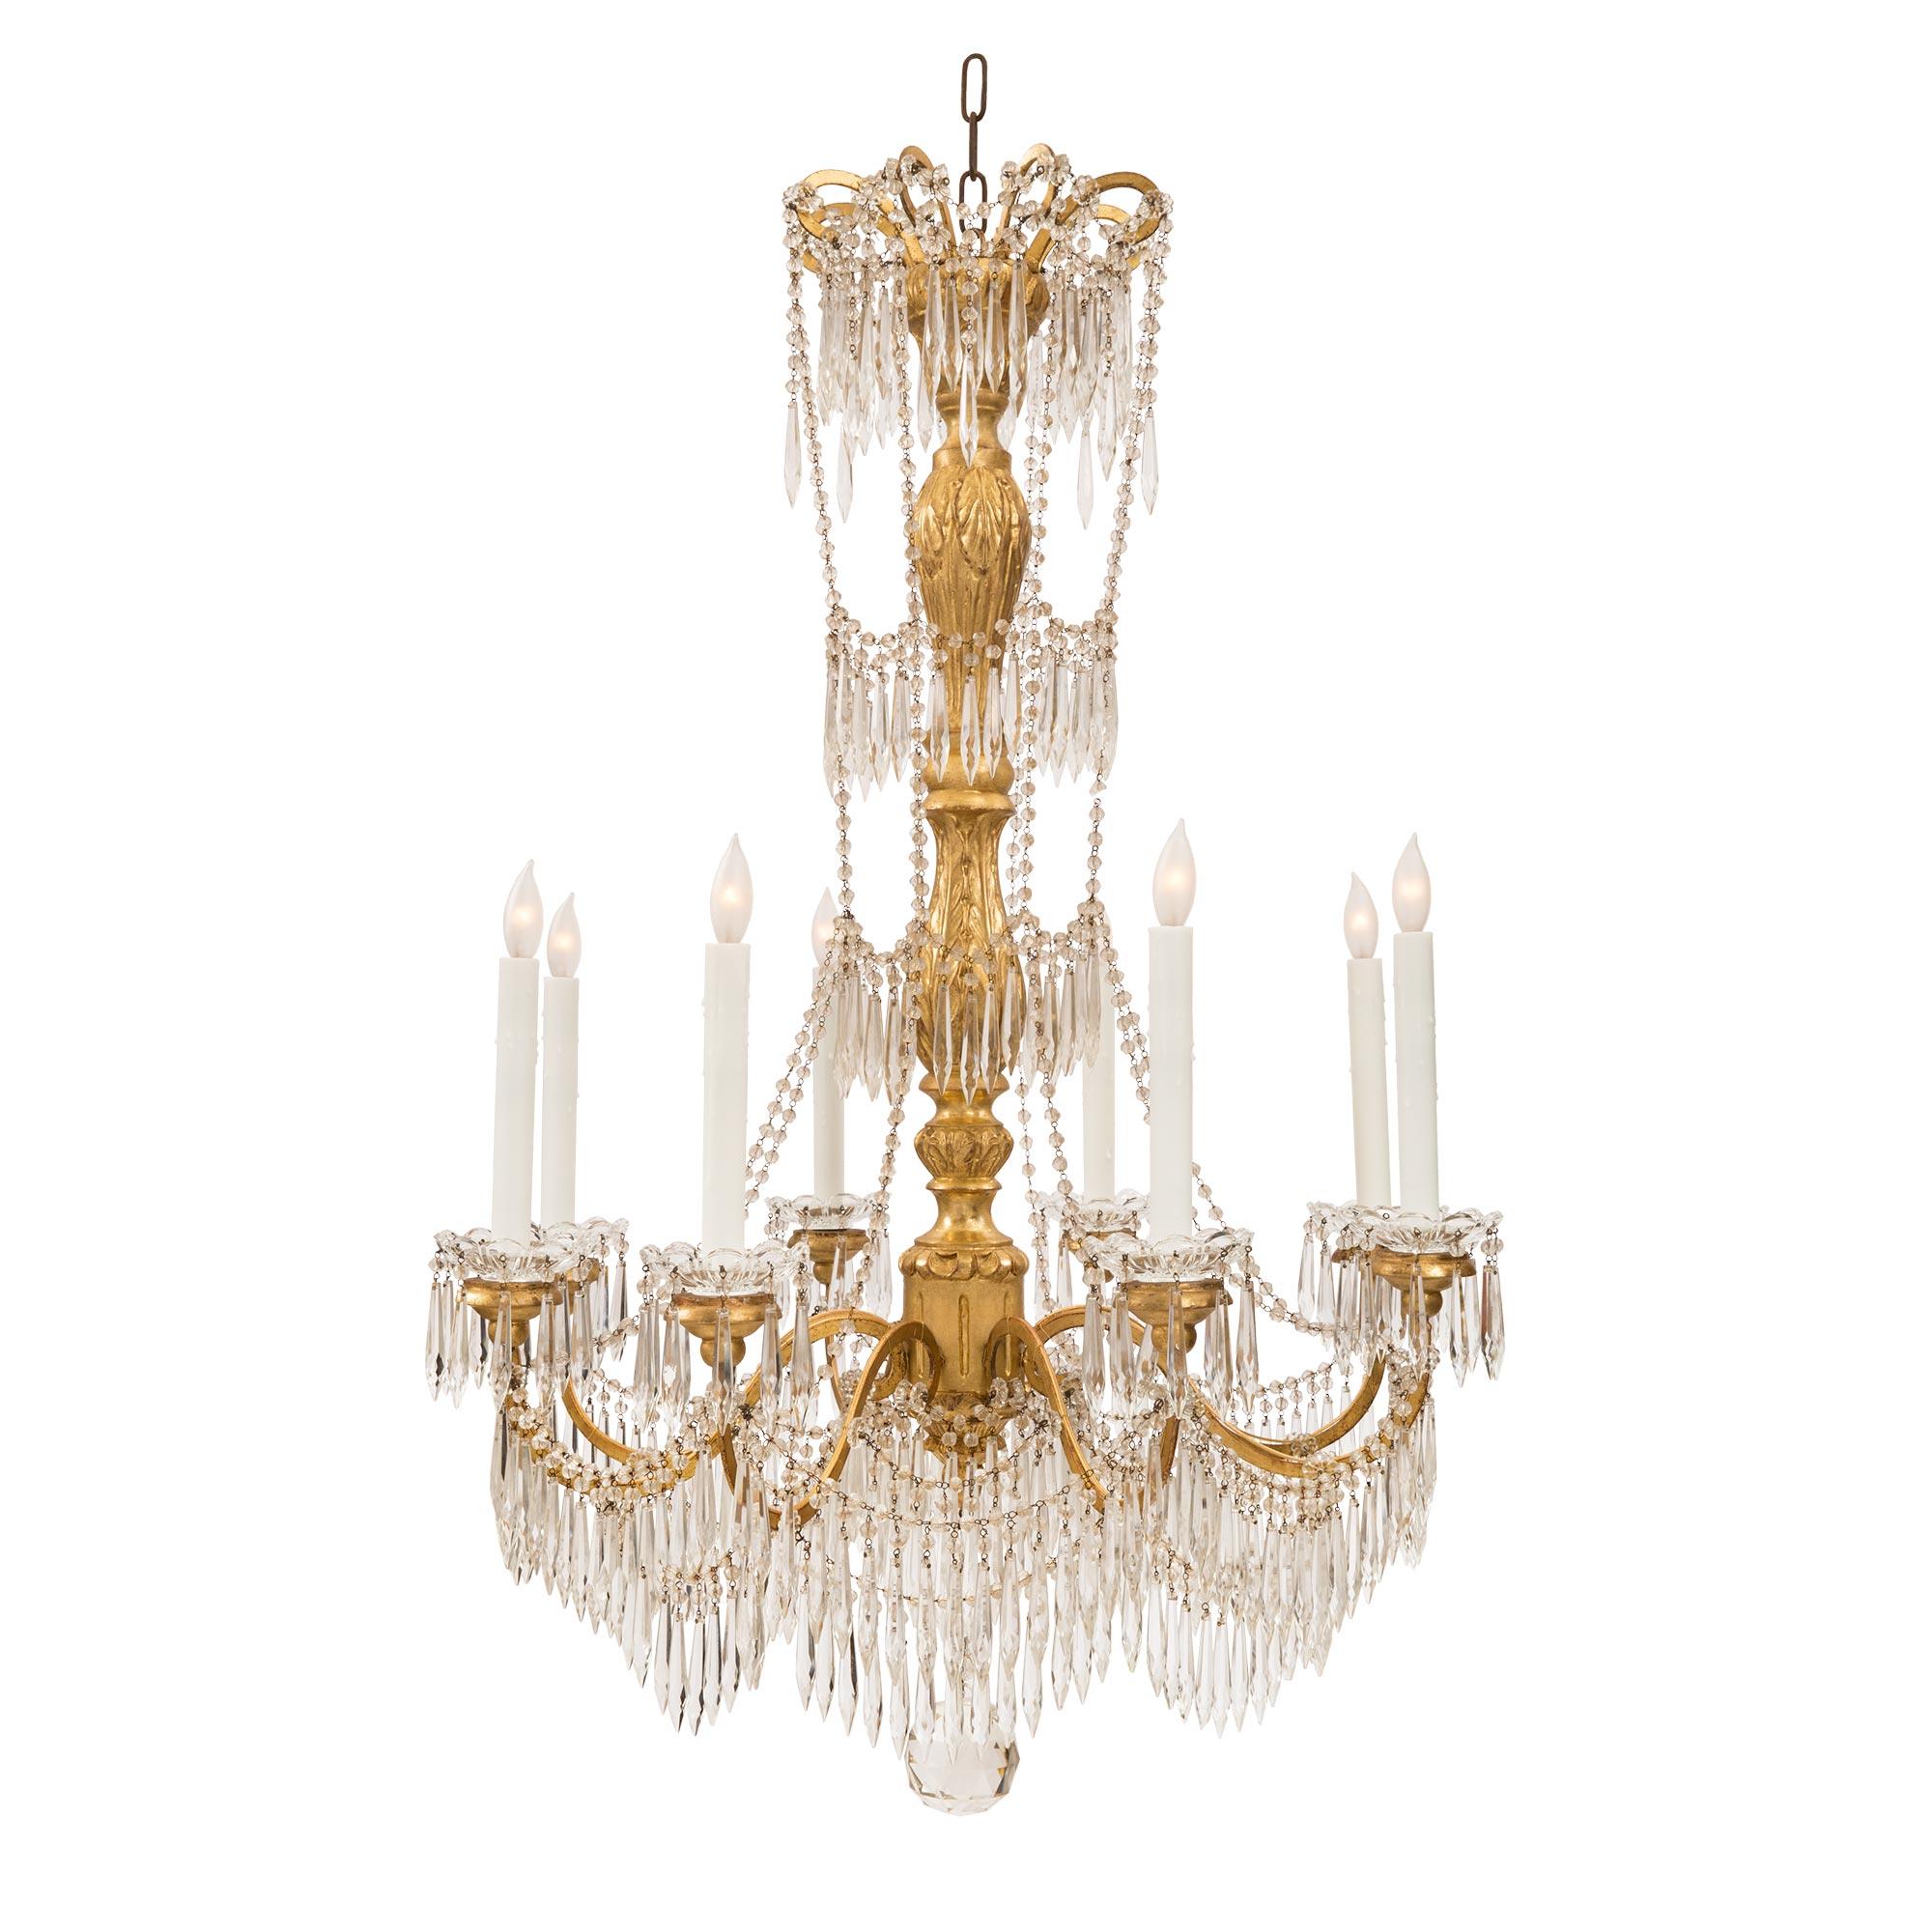 A most elegant Italian early 19th century Louis XVI st. giltwood, gilt metal and crystal eight arm chandelier. The chandelier is centered by a beautiful solid cut crystal ball and a lovely and impressive array of prism shaped cut crystal pendants.